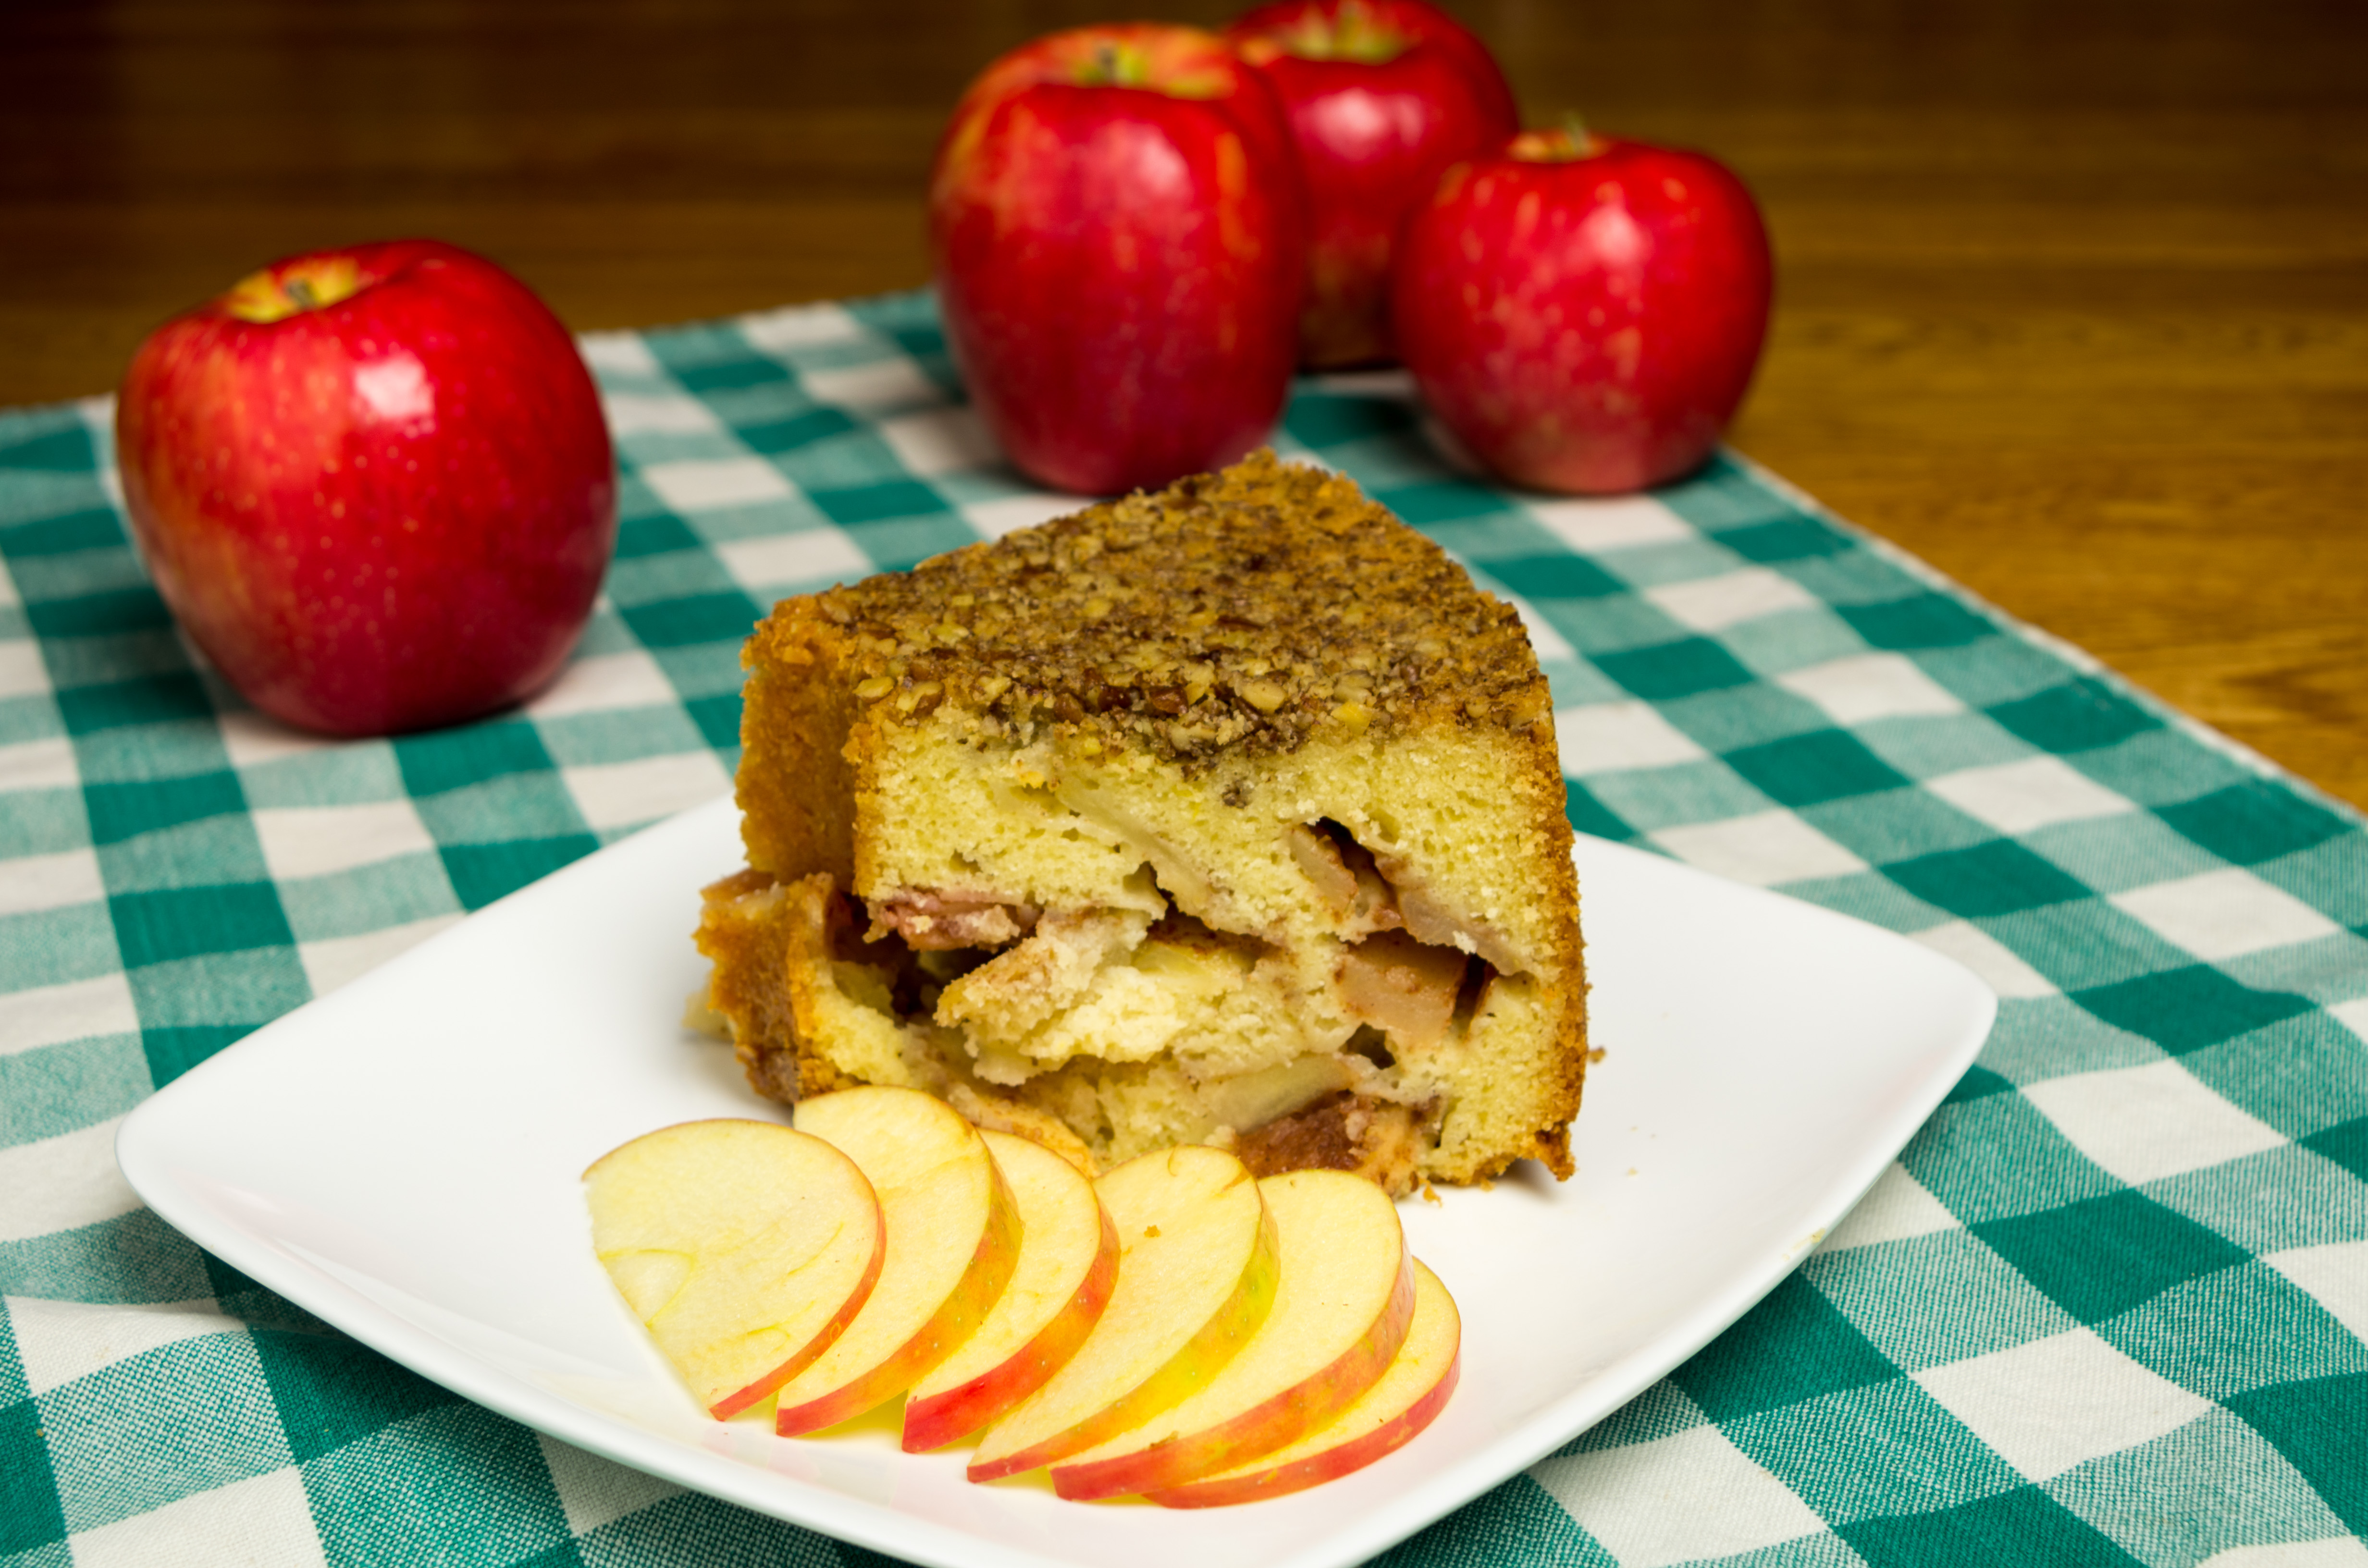 red apples and apple cake